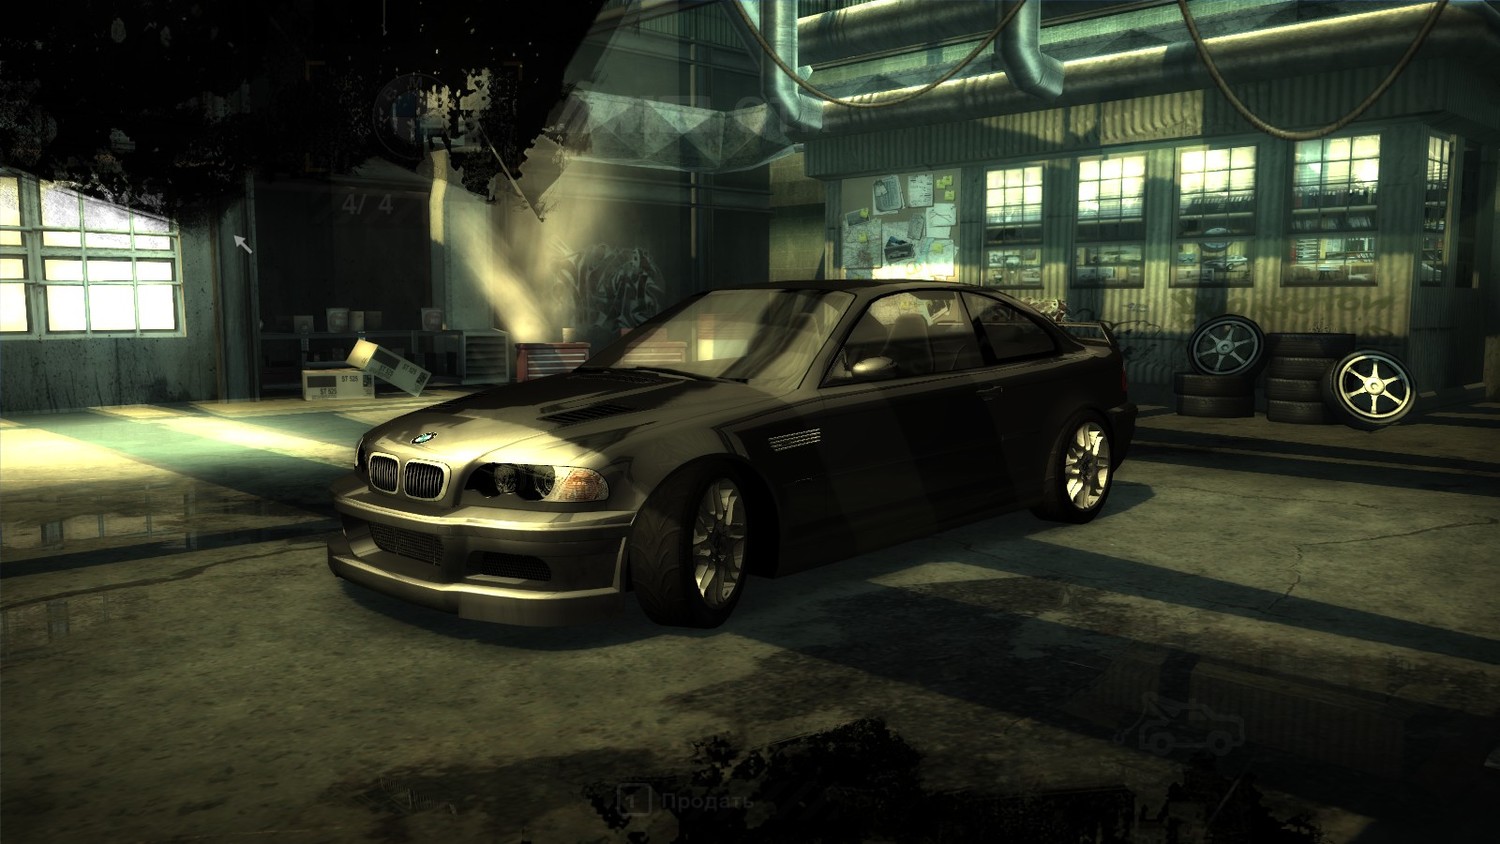 Need for Speed: Most Wanted (2005) - SaveGame (Good start, 6 cars) [1.0]